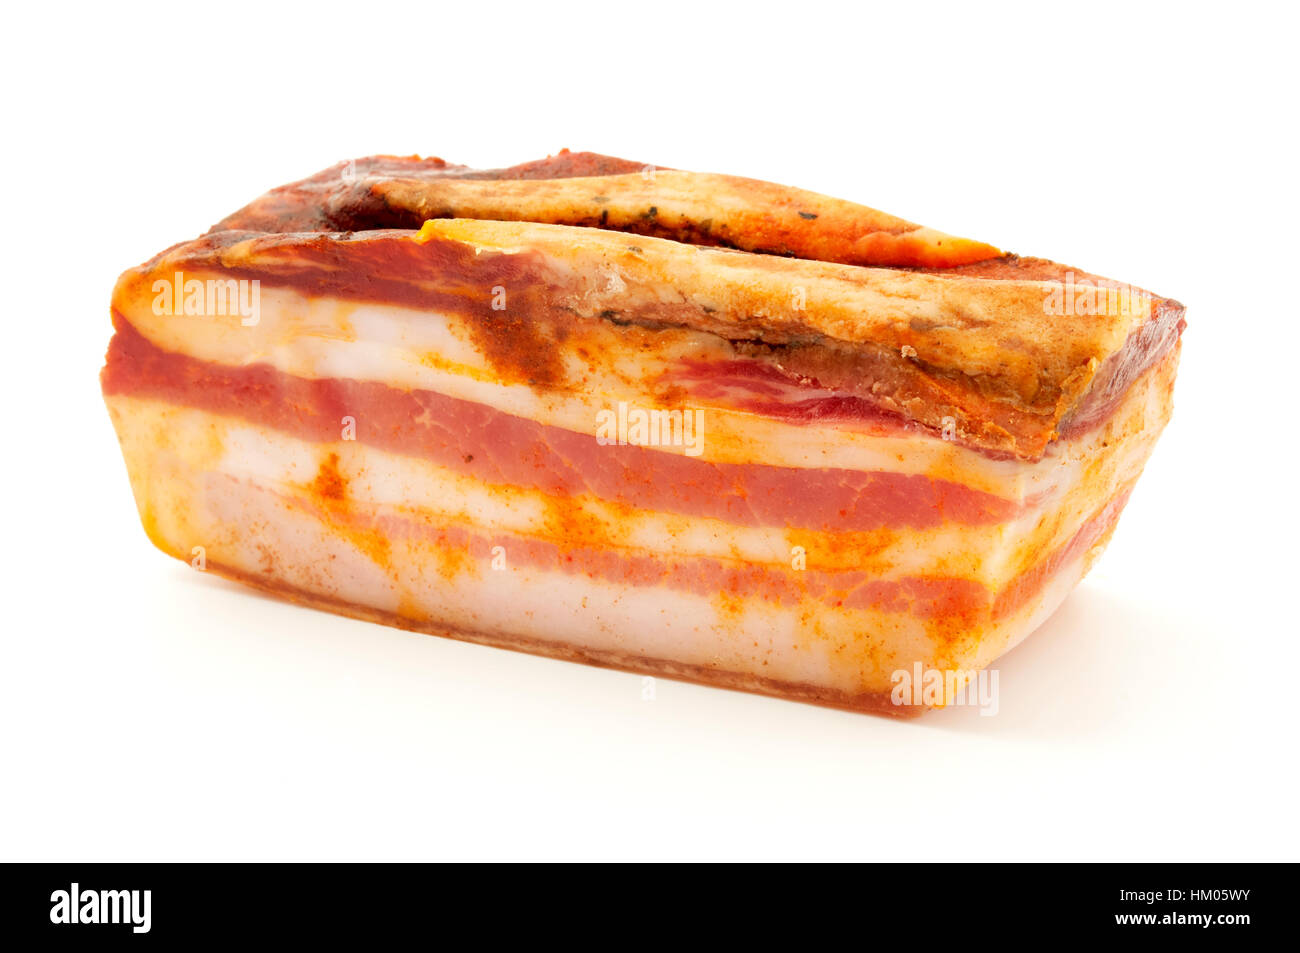 https://c8.alamy.com/comp/HM05WY/calabrian-pancetta-on-a-white-background-HM05WY.jpg